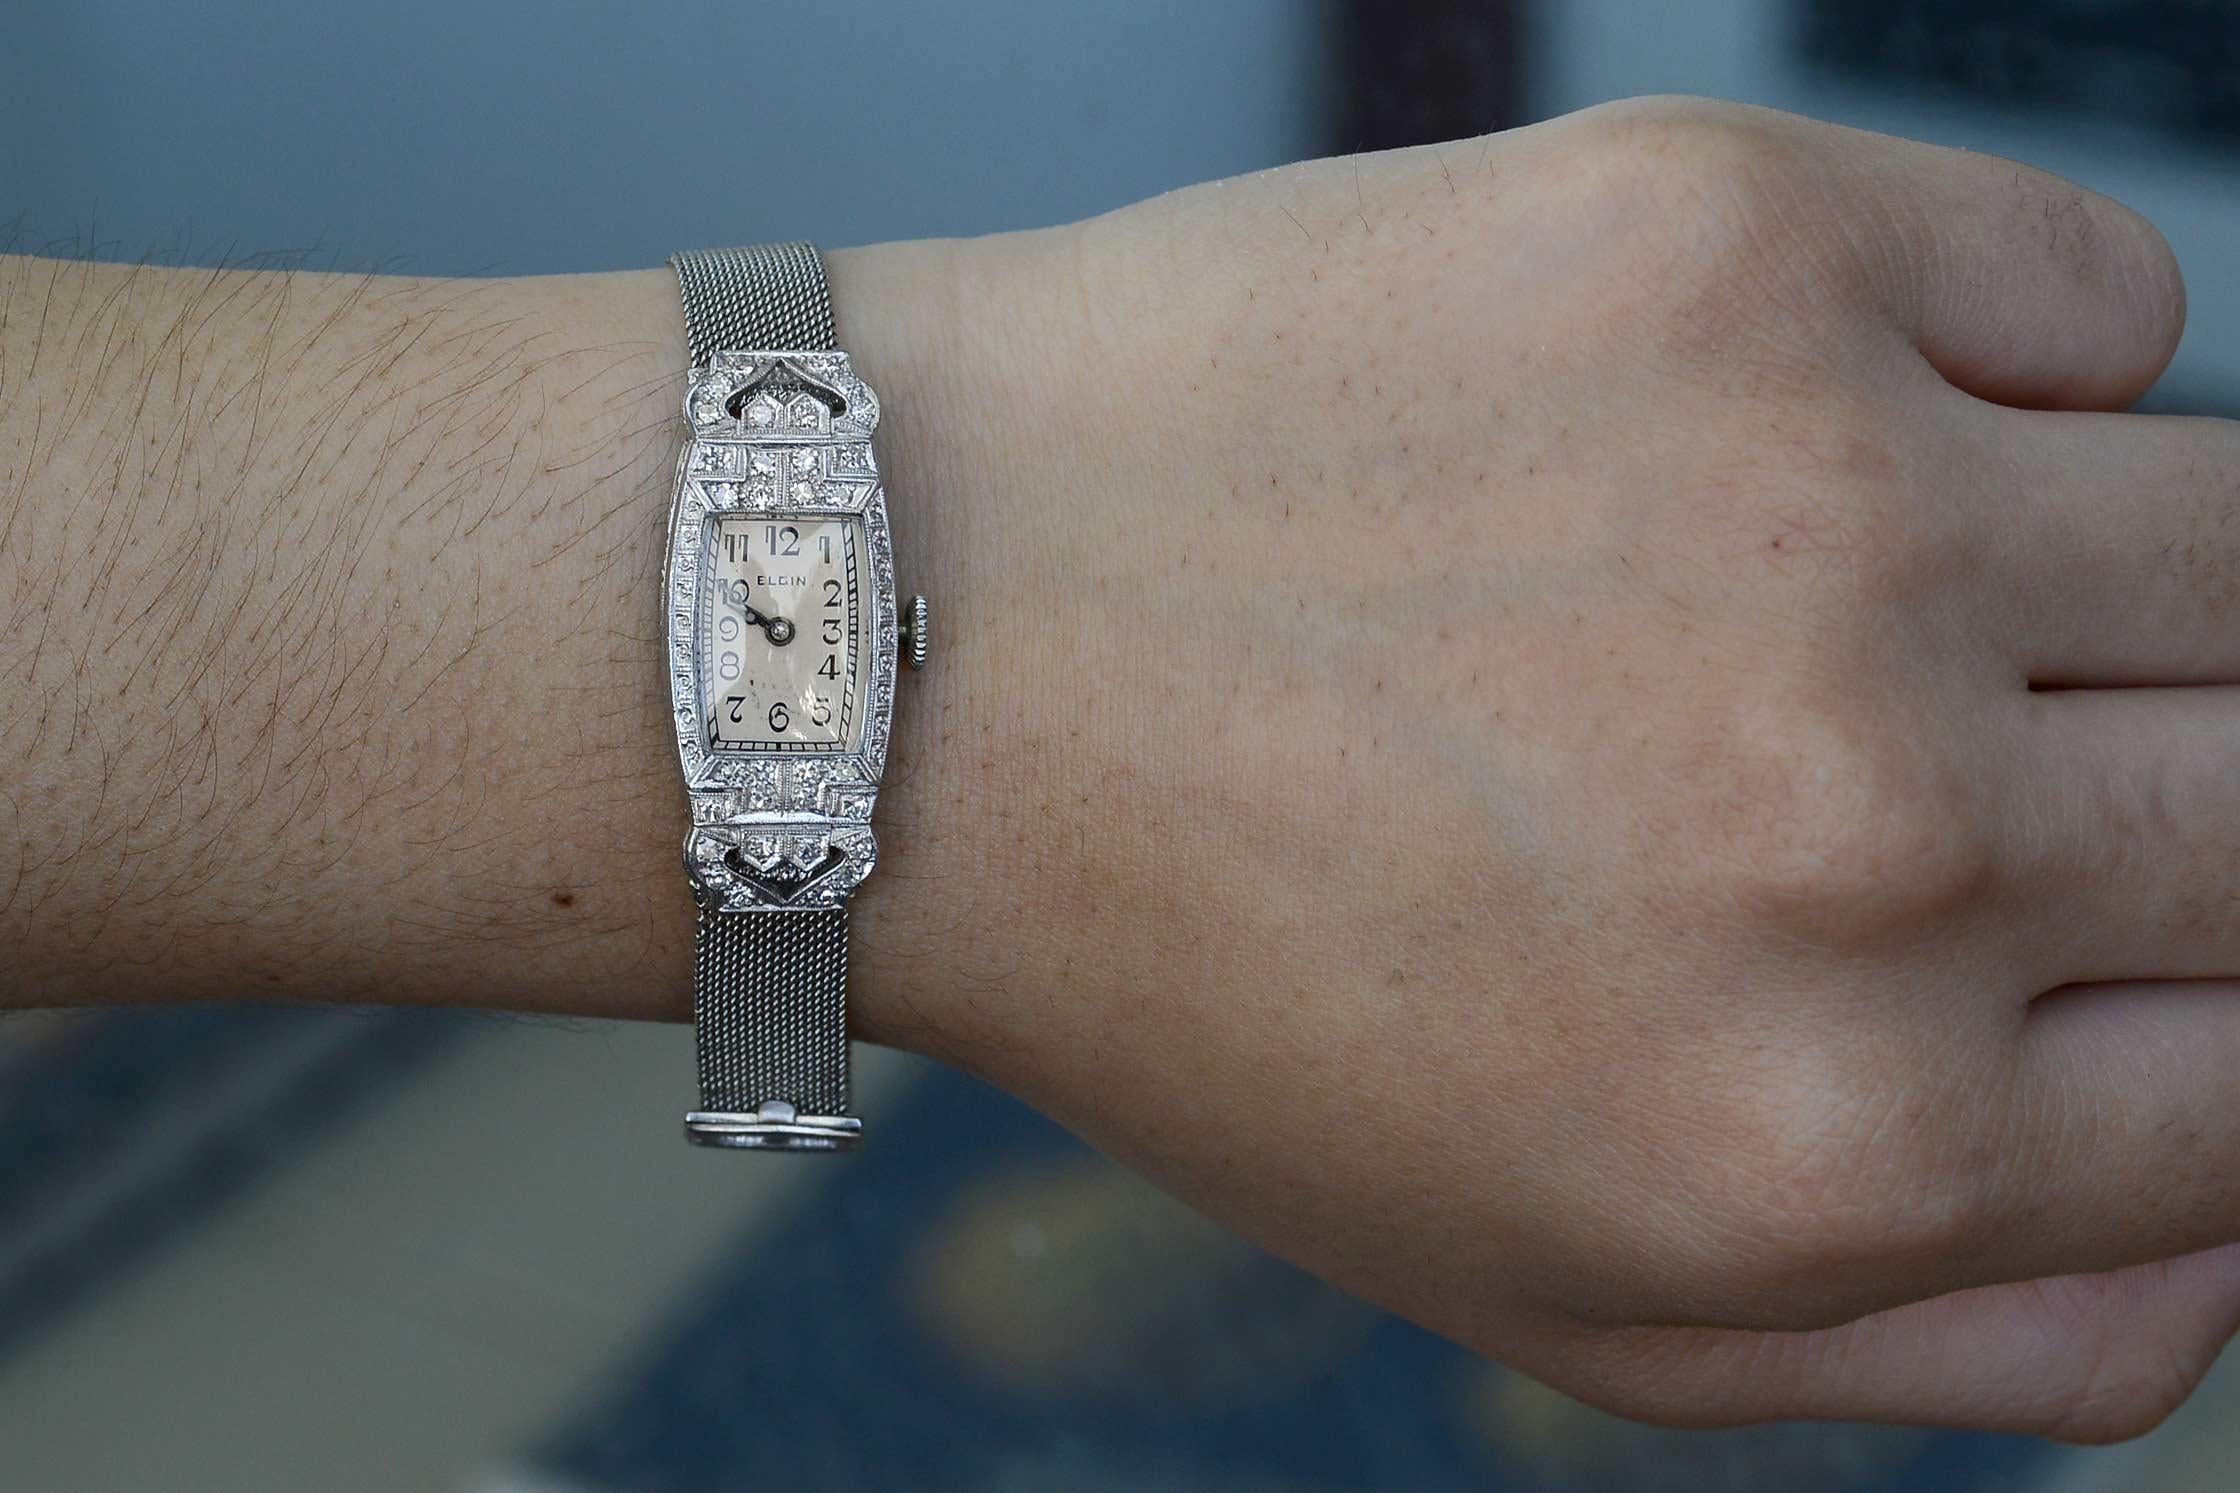 This stunning antique diamond Elgin 1920s Art Deco watch features a platinum & white gold case along with the dial's stylized numerals. The white gold mesh band is smooth, sleek and has an adjustable buckle to accommodate many wrist sizes. The face